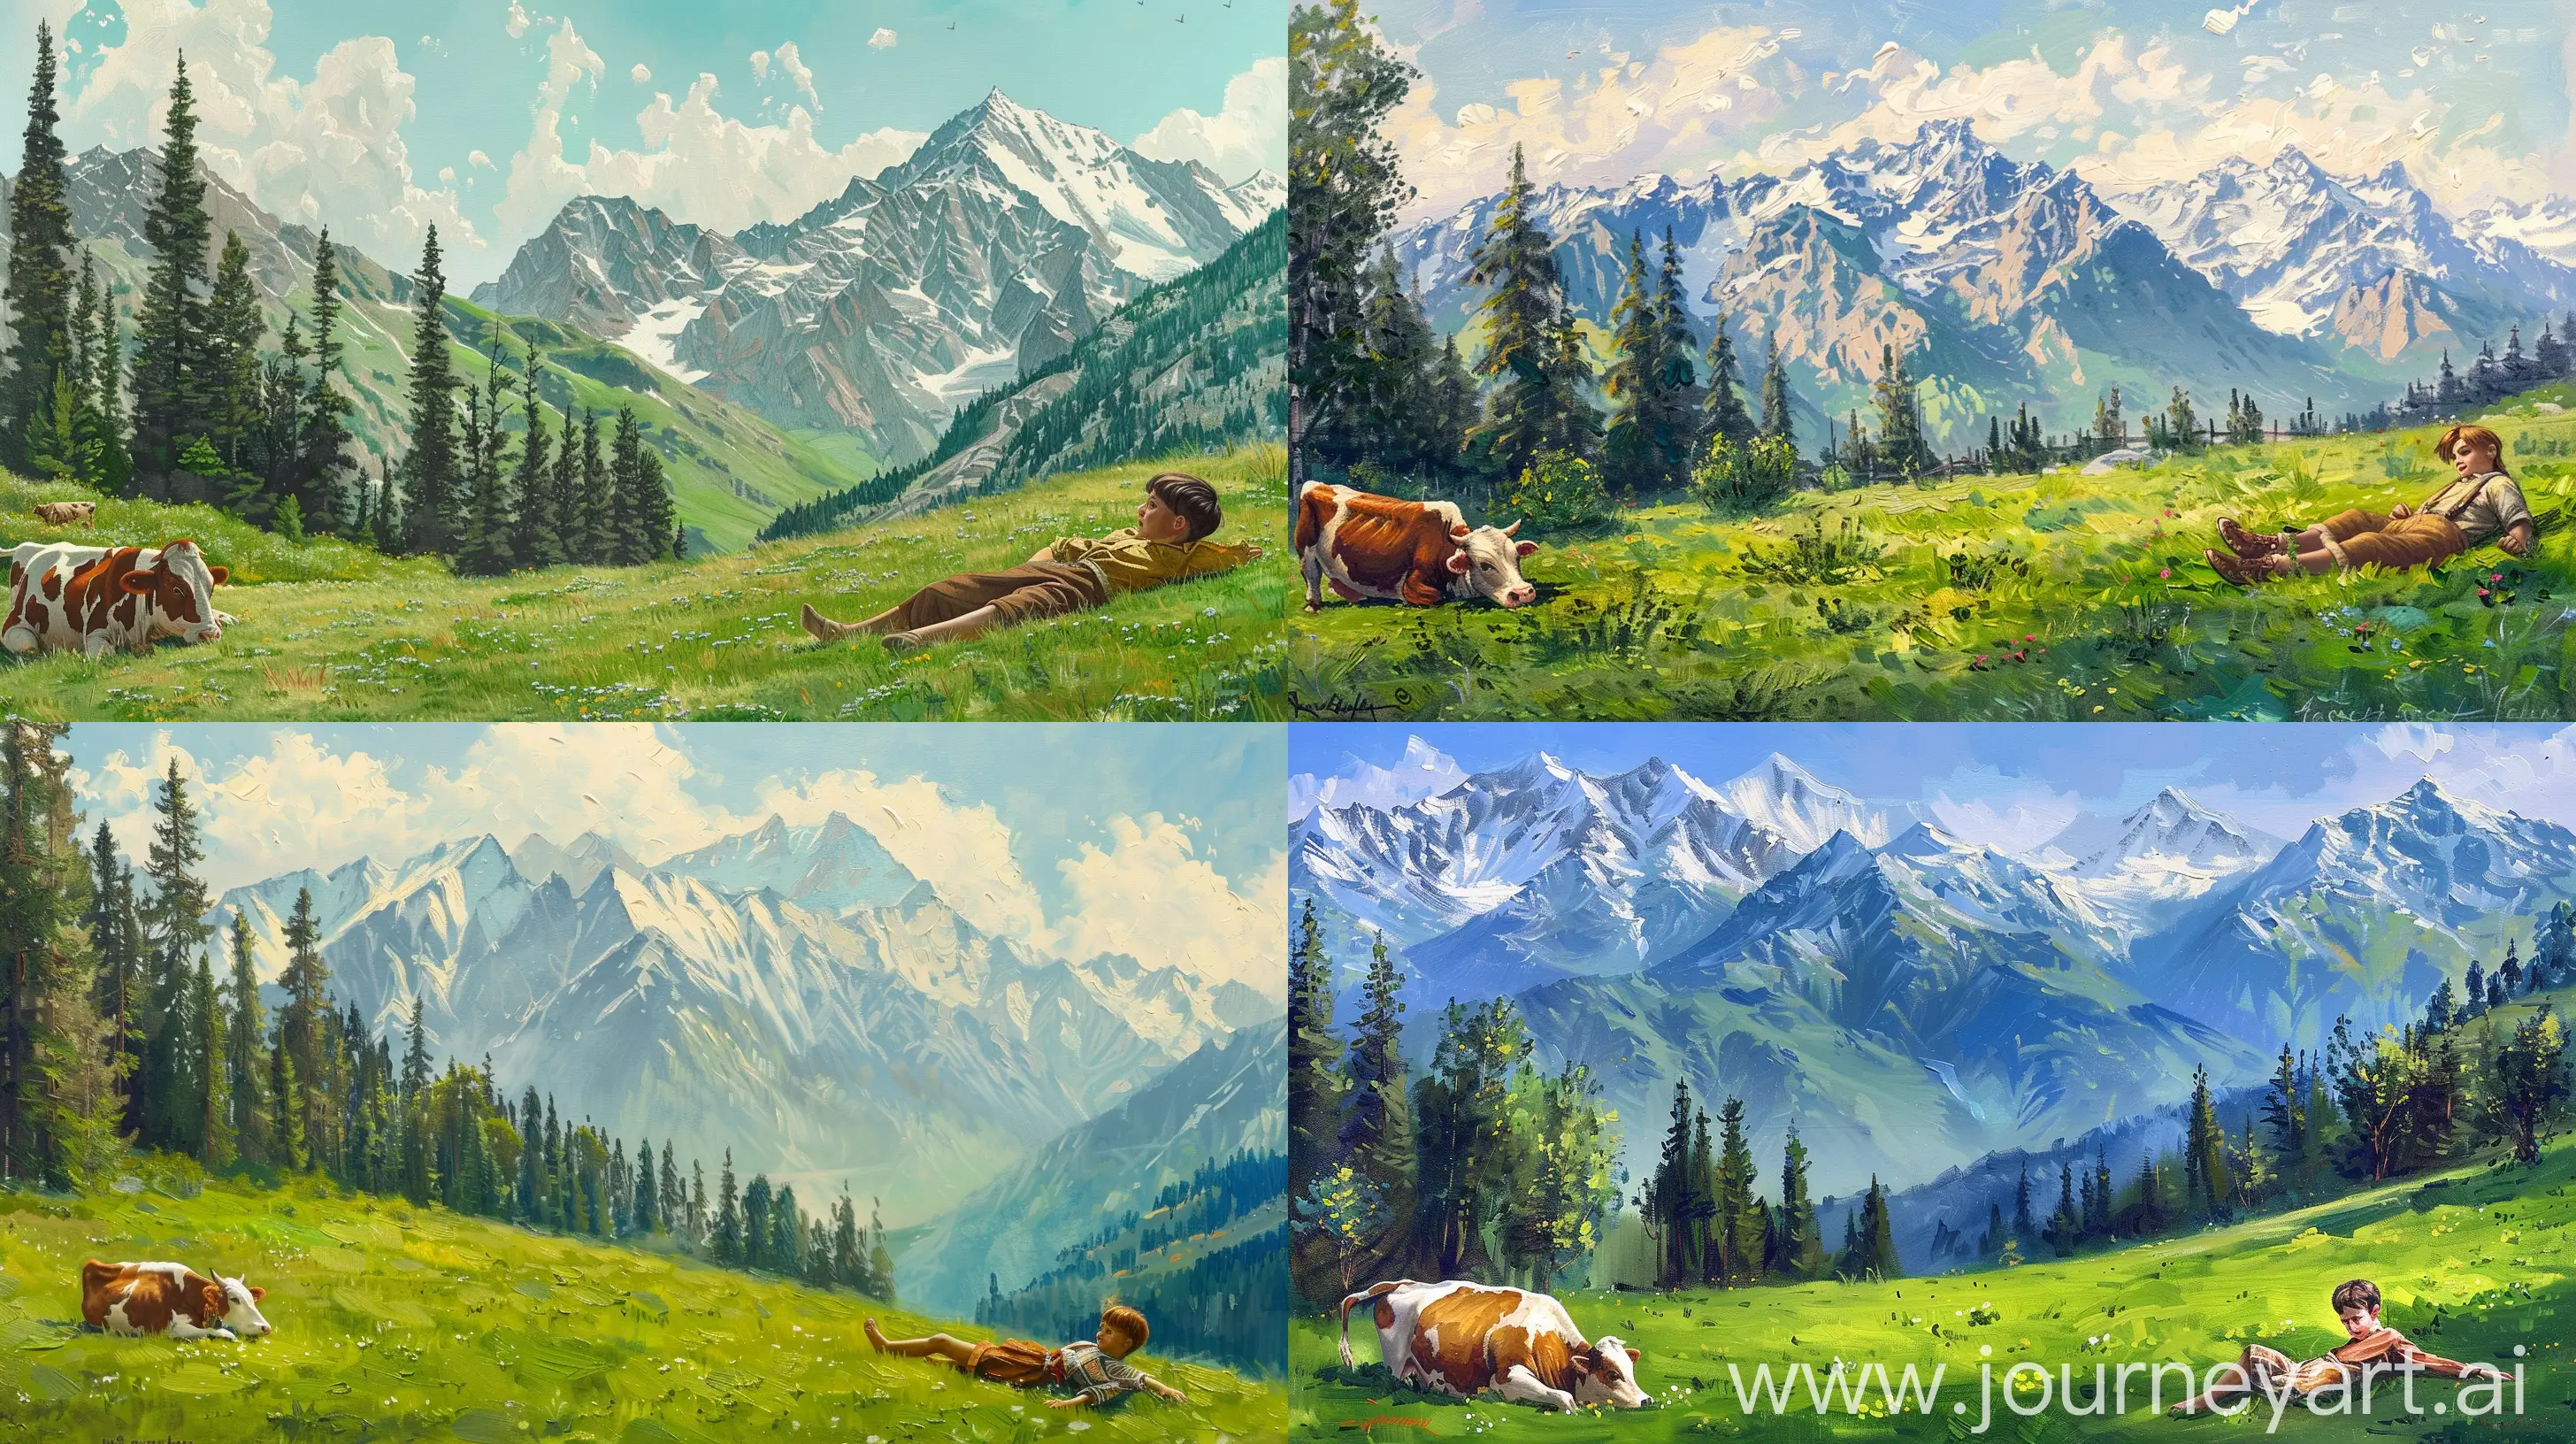 Create a picturesque oil painting artwork that captures a serene mountainous landscape with a pastoral scene. Include a lush green meadow with a grazing cow on the left side, and a young boy in traditional rural clothing reclining on the grass on the right side. Ensure the boy is depicted at rest, gazing out at the scenery with a sense of peacefulness. Add a line of trees in the middle ground separating the meadow from the distant snow-capped mountains. Pay attention to detail in rendering the grass, cow's fur, and mountain textures. Use a vibrant color palette with rich greens, blues, and whites to convey the freshness and clarity of the alpine environment. Aim for a realistic style with meticulous brushwork to enhance the overall sense of realism and capture the beauty of nature and rural life --ar 16:9 --c 3